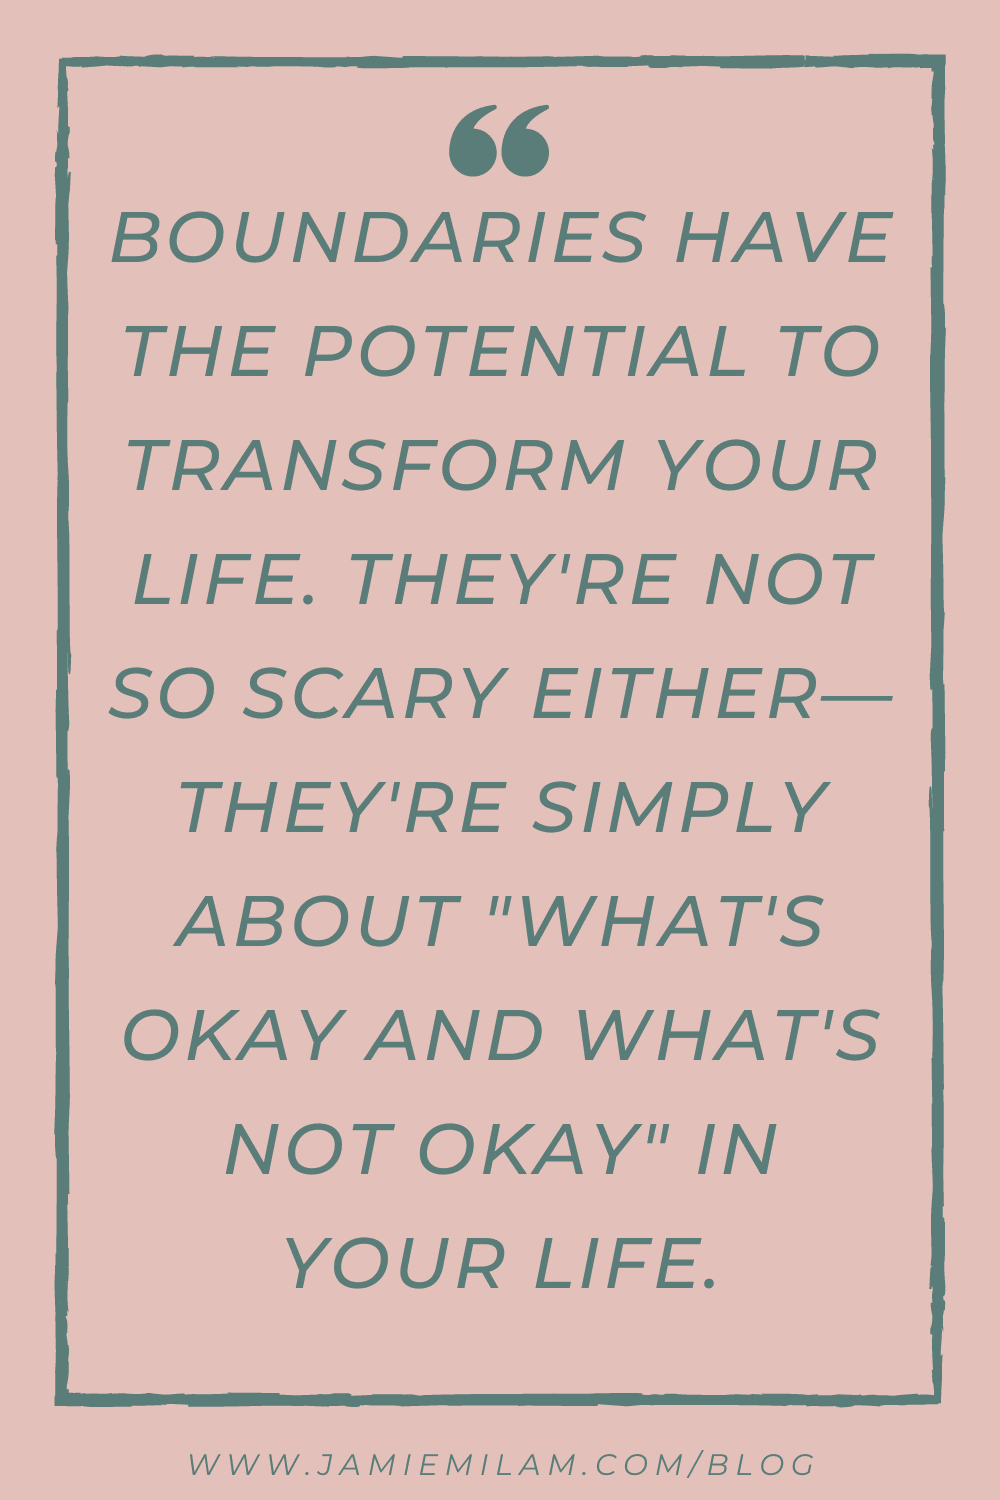 Text: "Boundaries have the potential to transform your life. They're not so scary either—they're simply about "what's okay and what's not okay" in your life.